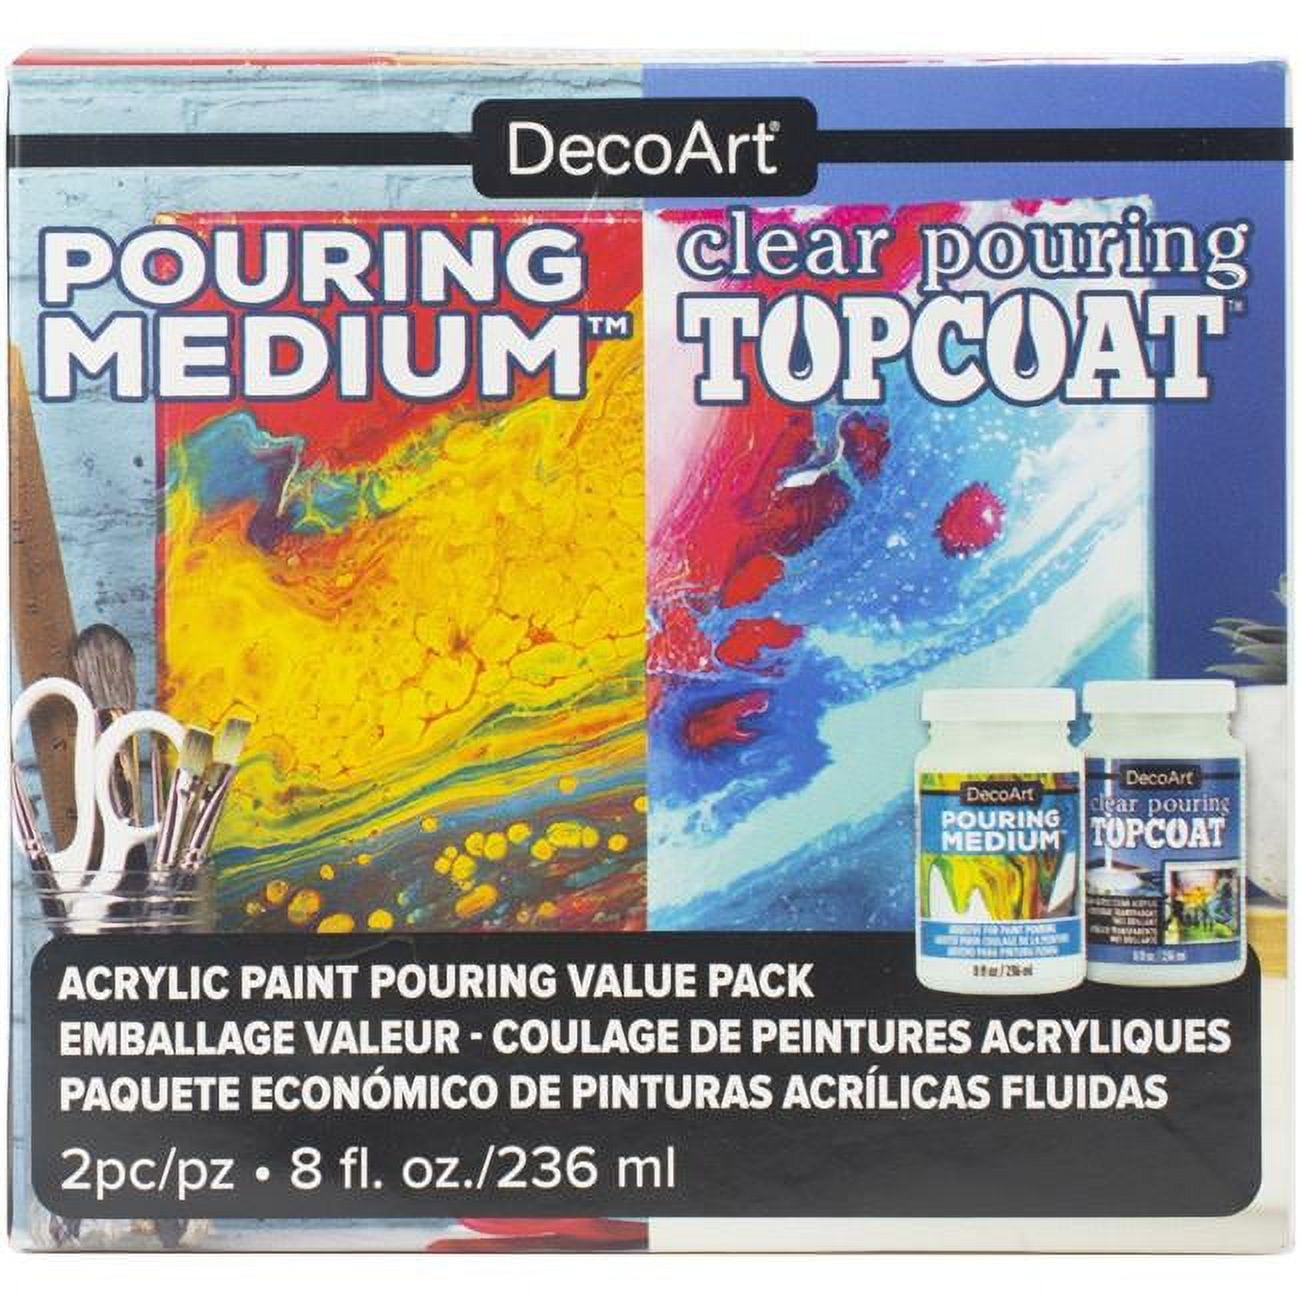 Pouring Masters Titanium White Acrylic Ready to Pour Pouring Paint Premium 32-Ounce Pre-Mixed Water-Based